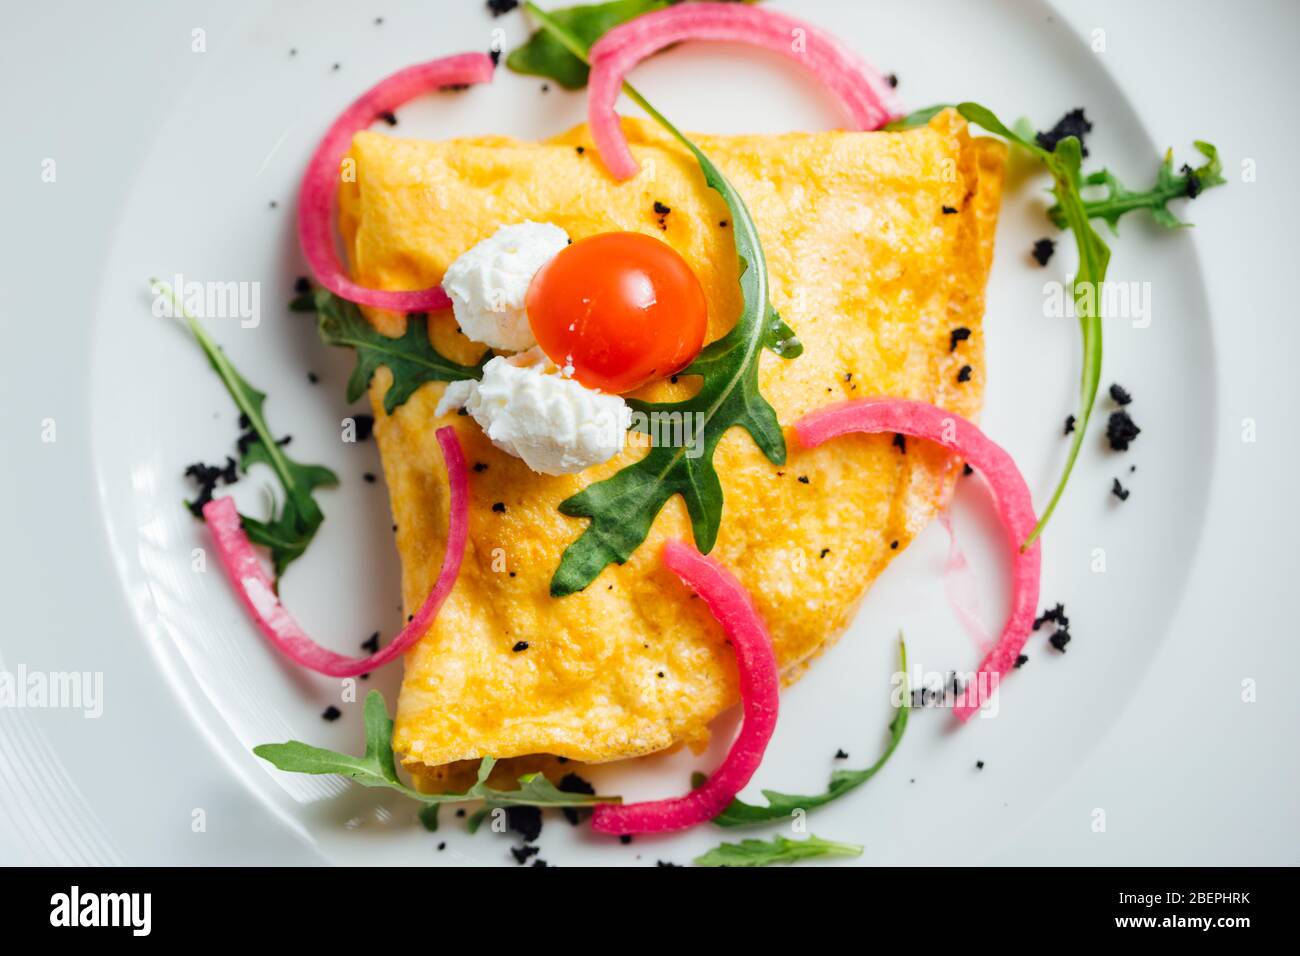 Homemade beaten eggs soft omelette.Colorful healthy breakfast at home.Home cooked meal served.Low calorie food,low carb lifestyle eating in.Keto meal. Stock Photo